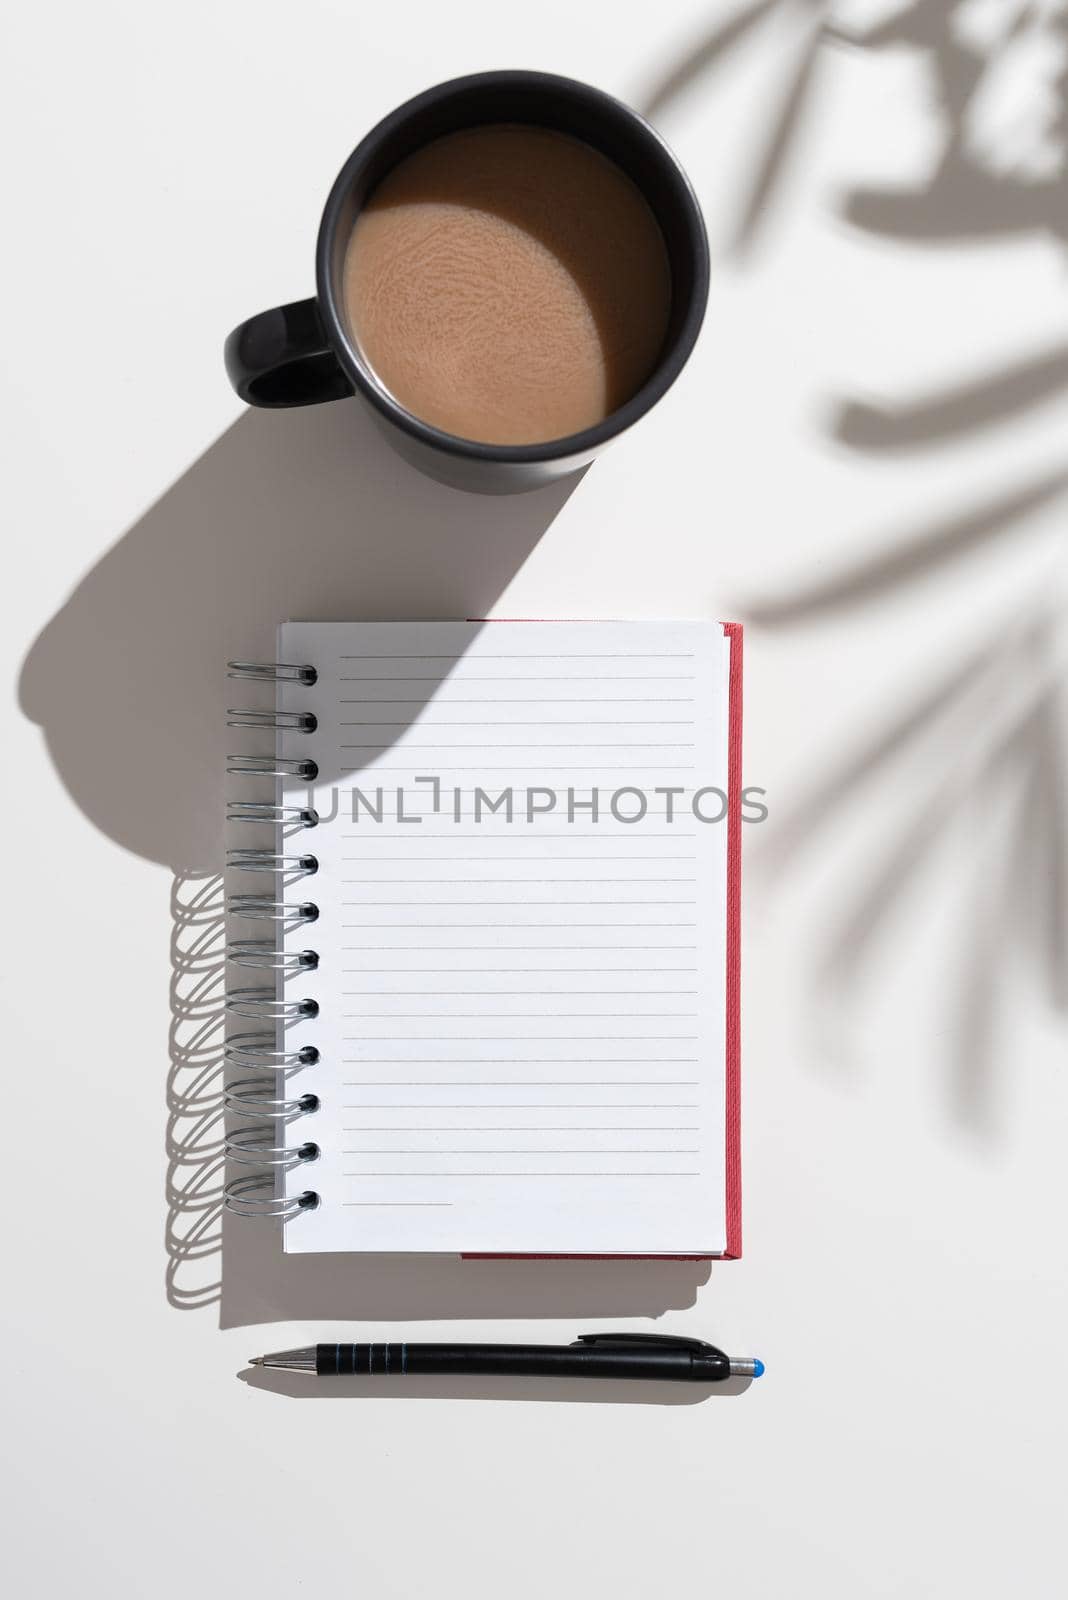 Notebook With Important Messages On Desk With Coffee And Pen.